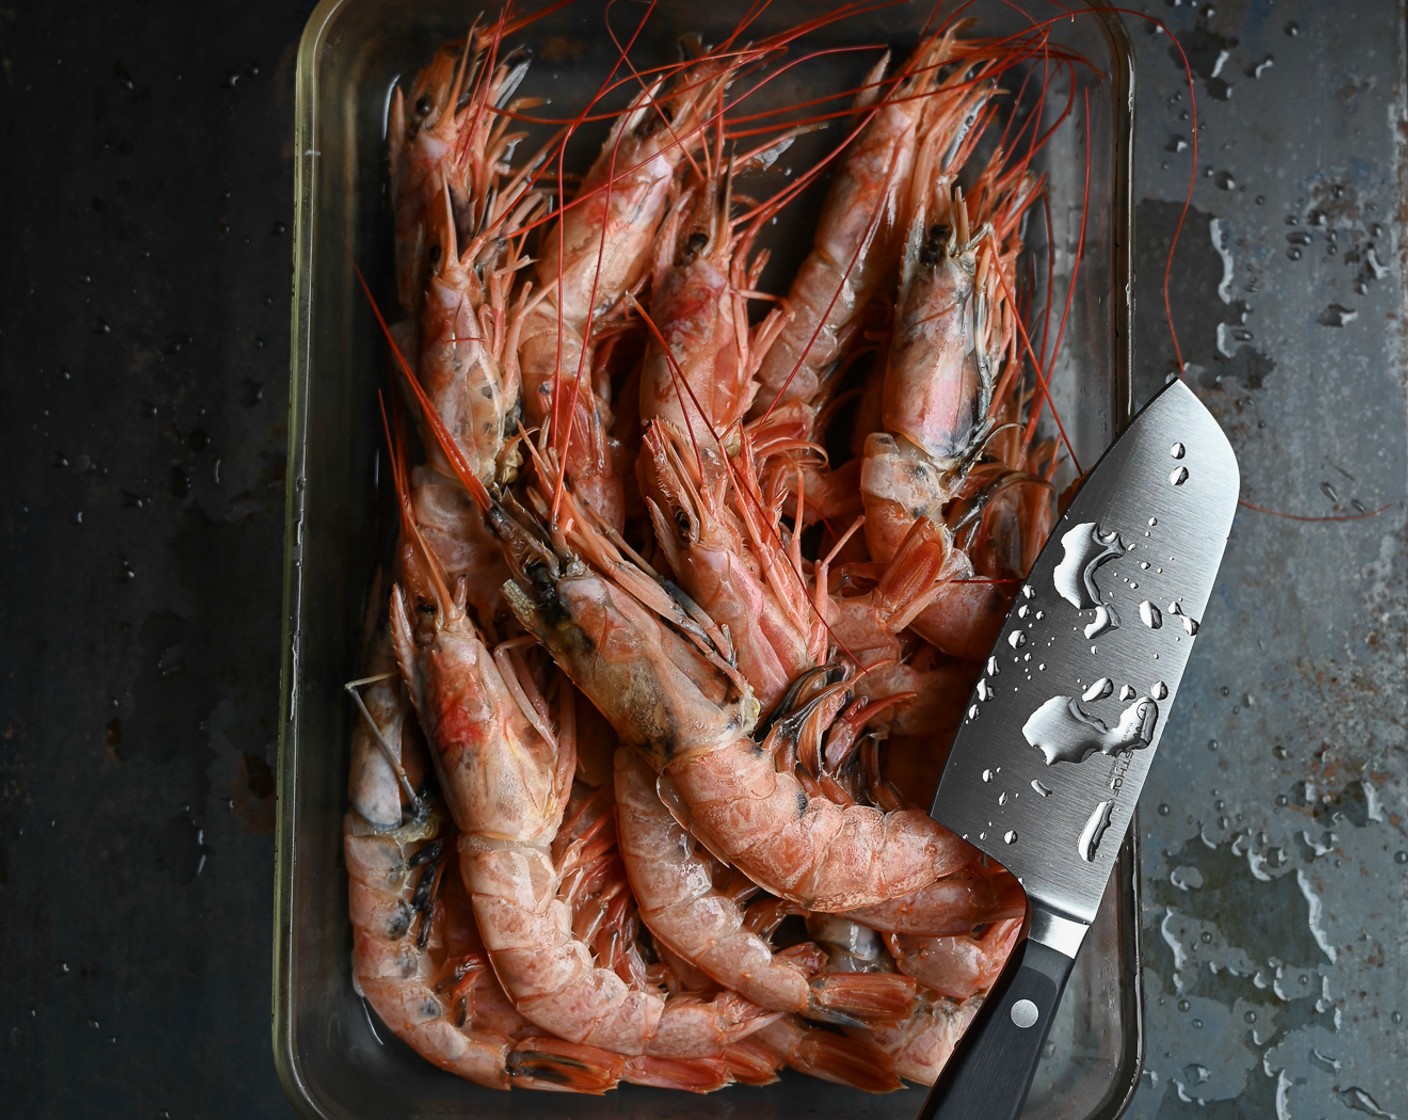 step 1 To devein Prawns (2.2 lb) use a knife to slice along the backbone of the prawn. Pull out the alimentary canal and discard.